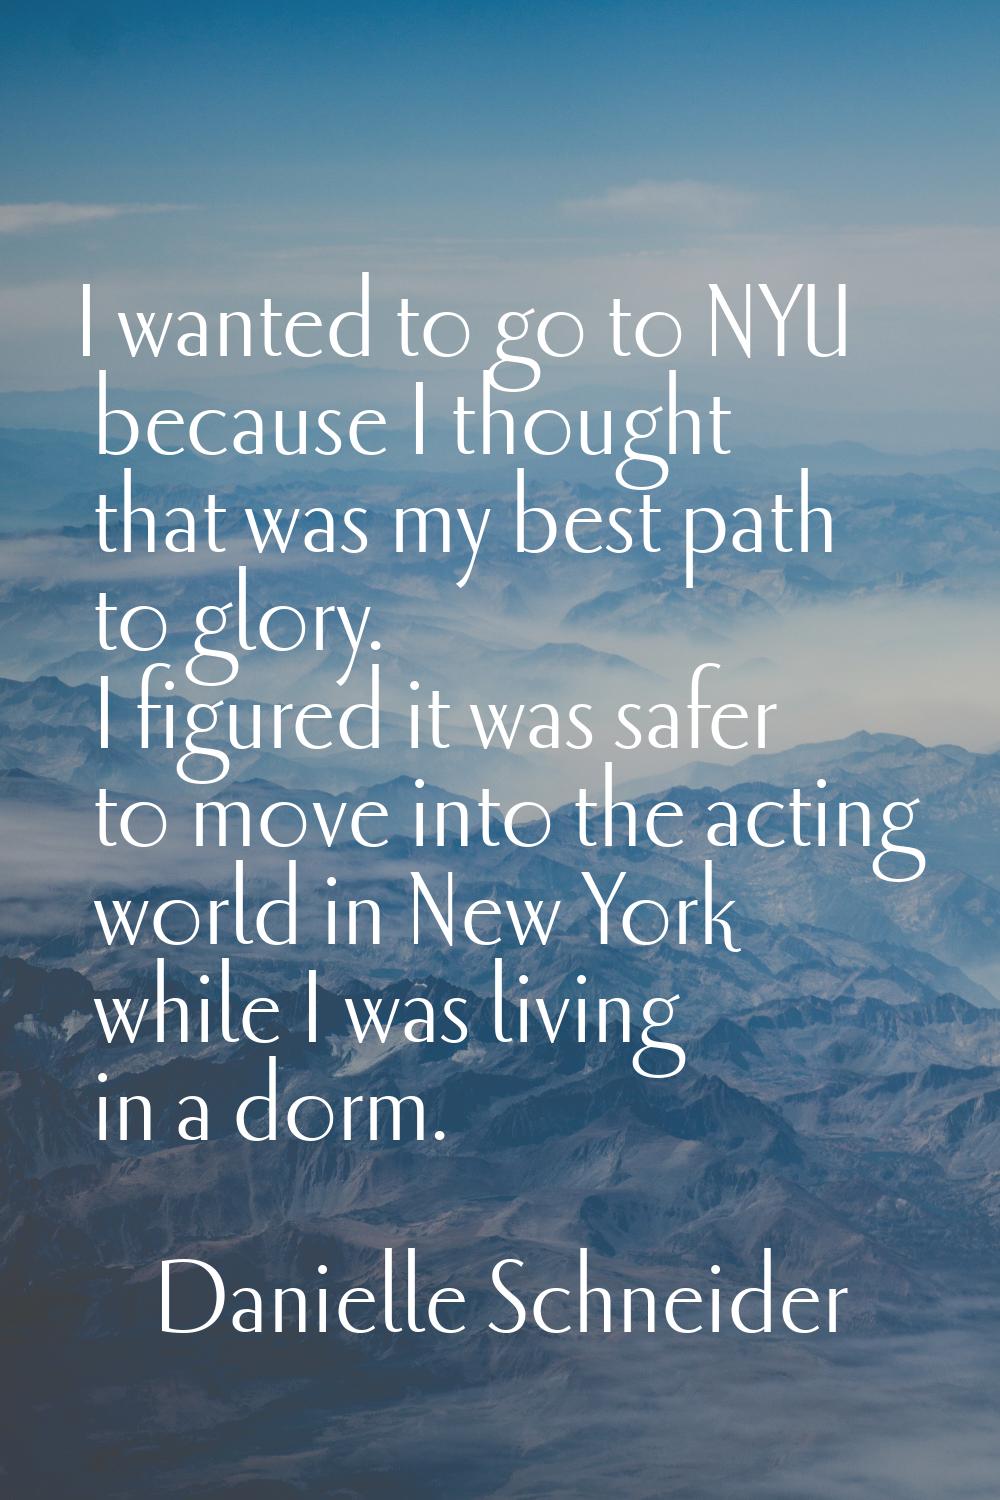 I wanted to go to NYU because I thought that was my best path to glory. I figured it was safer to m